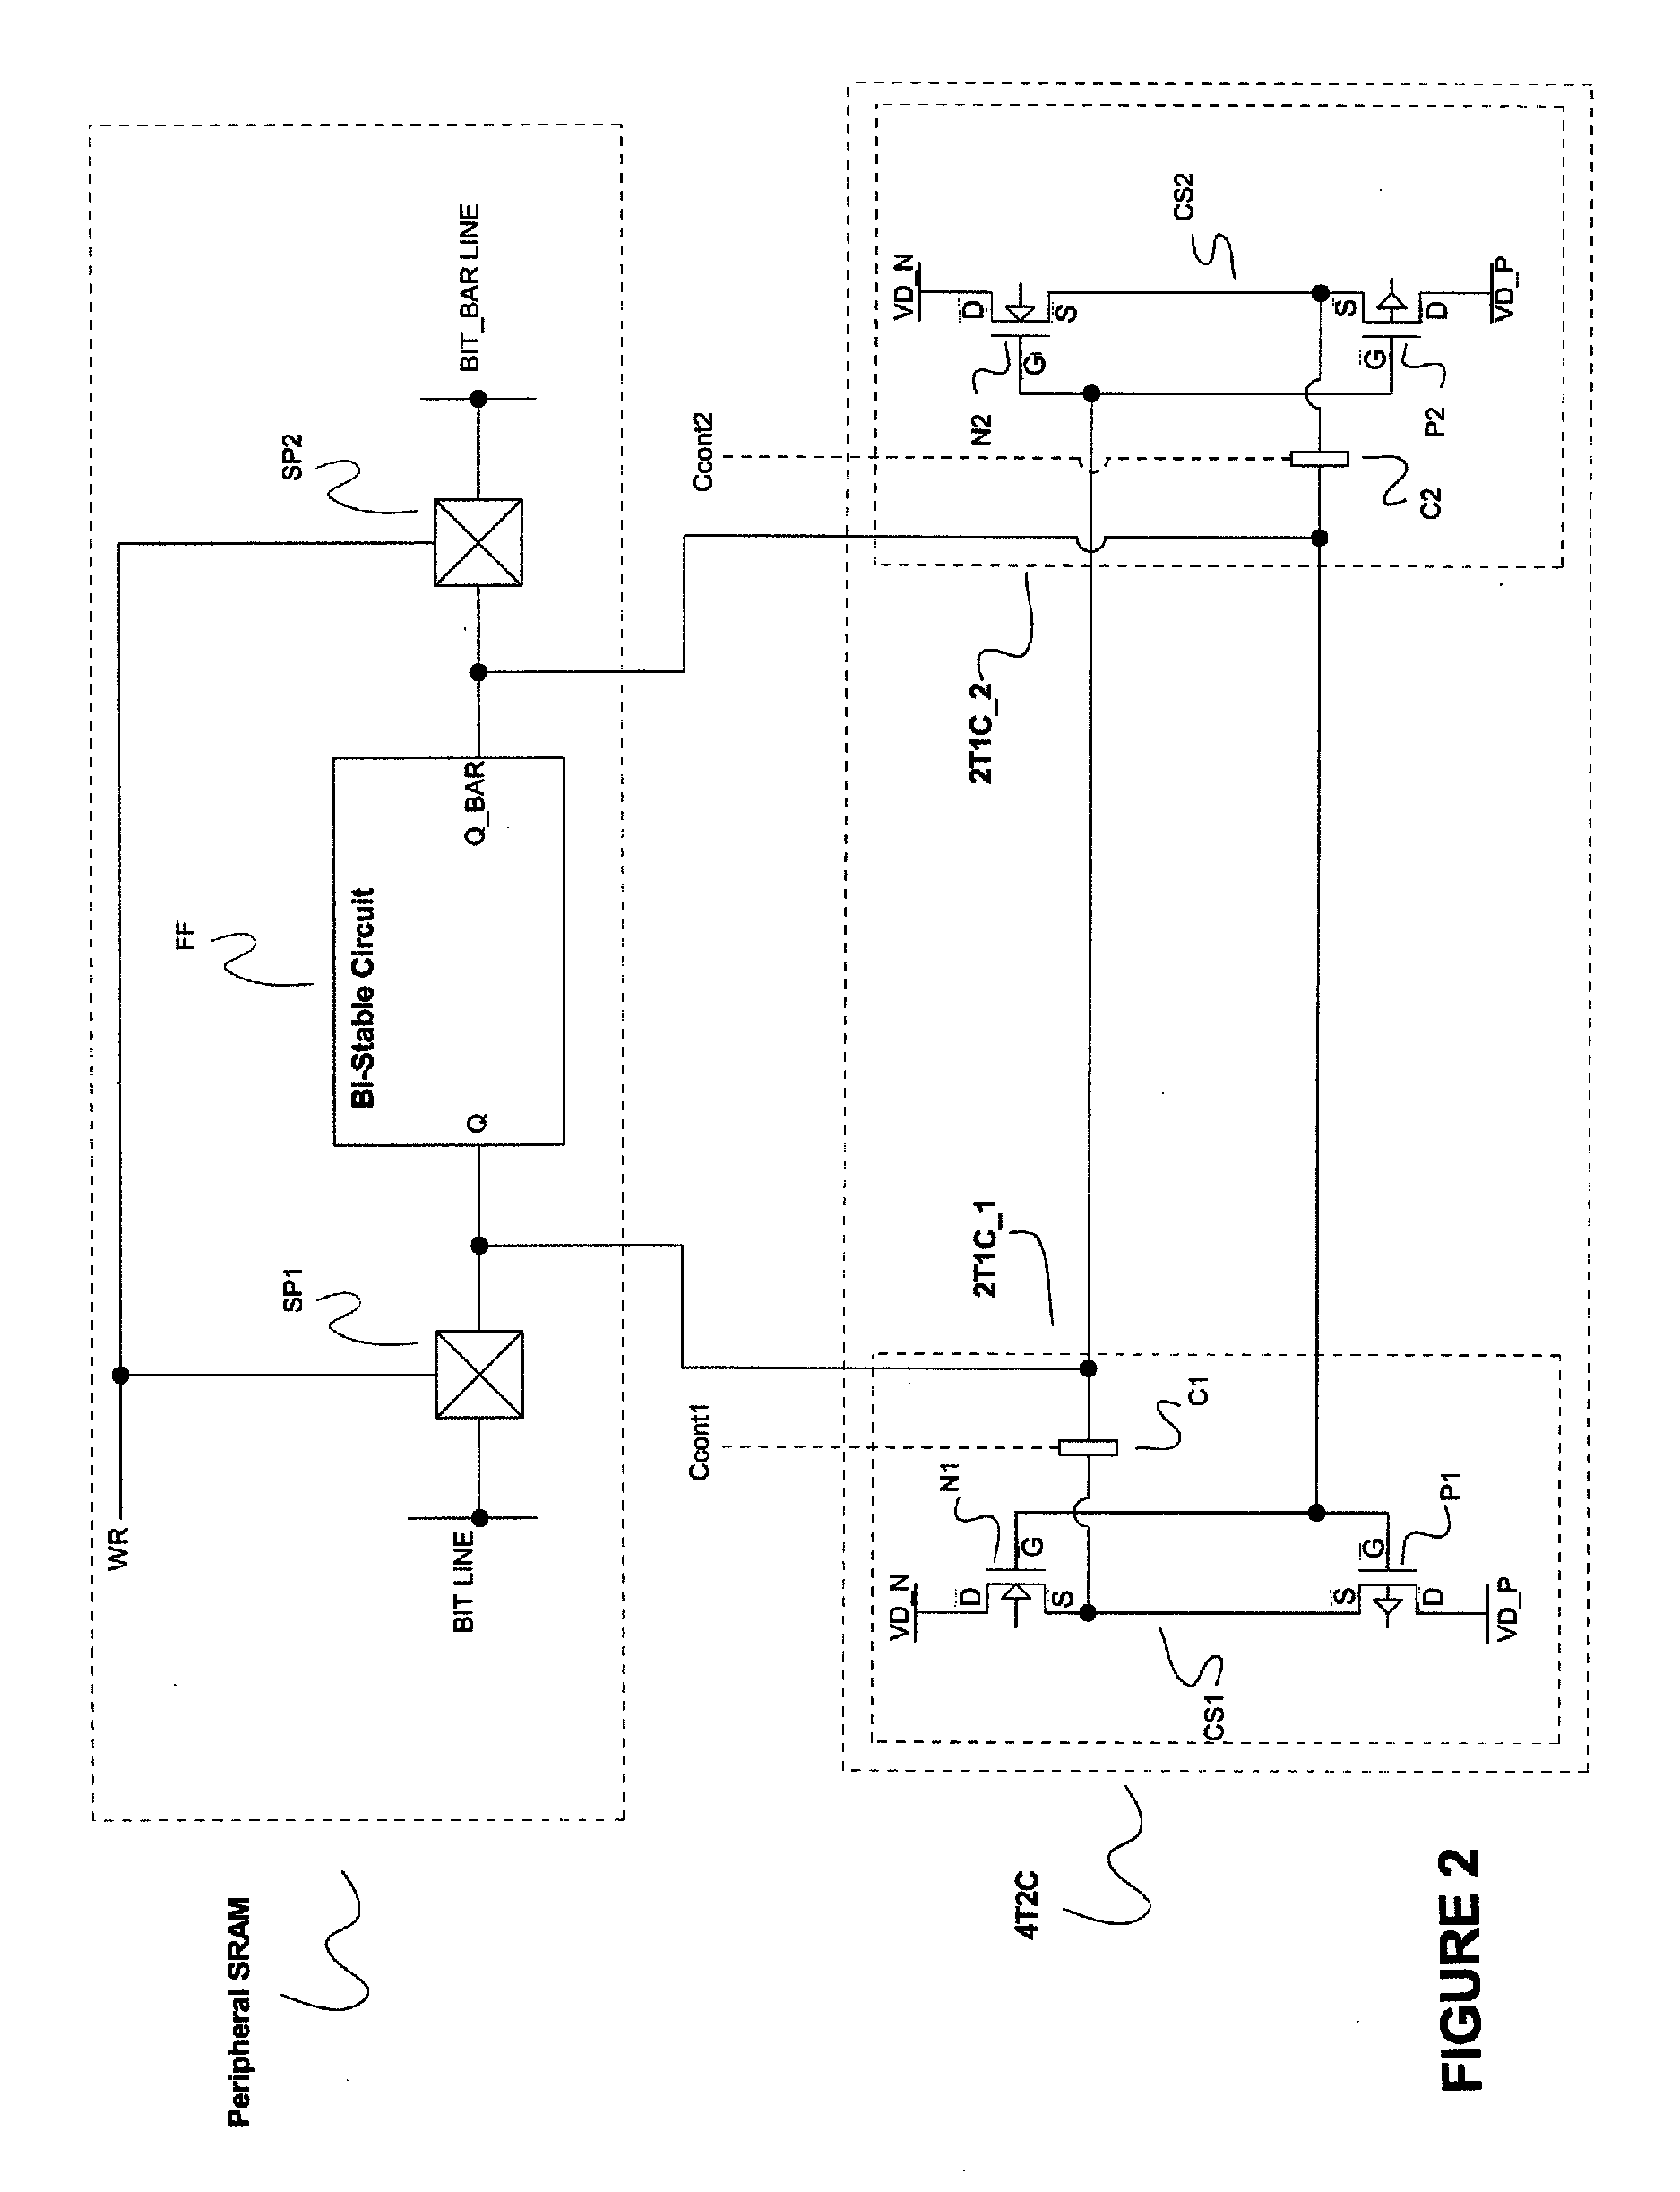 Radiation sensors and single-event-effects suppression devices